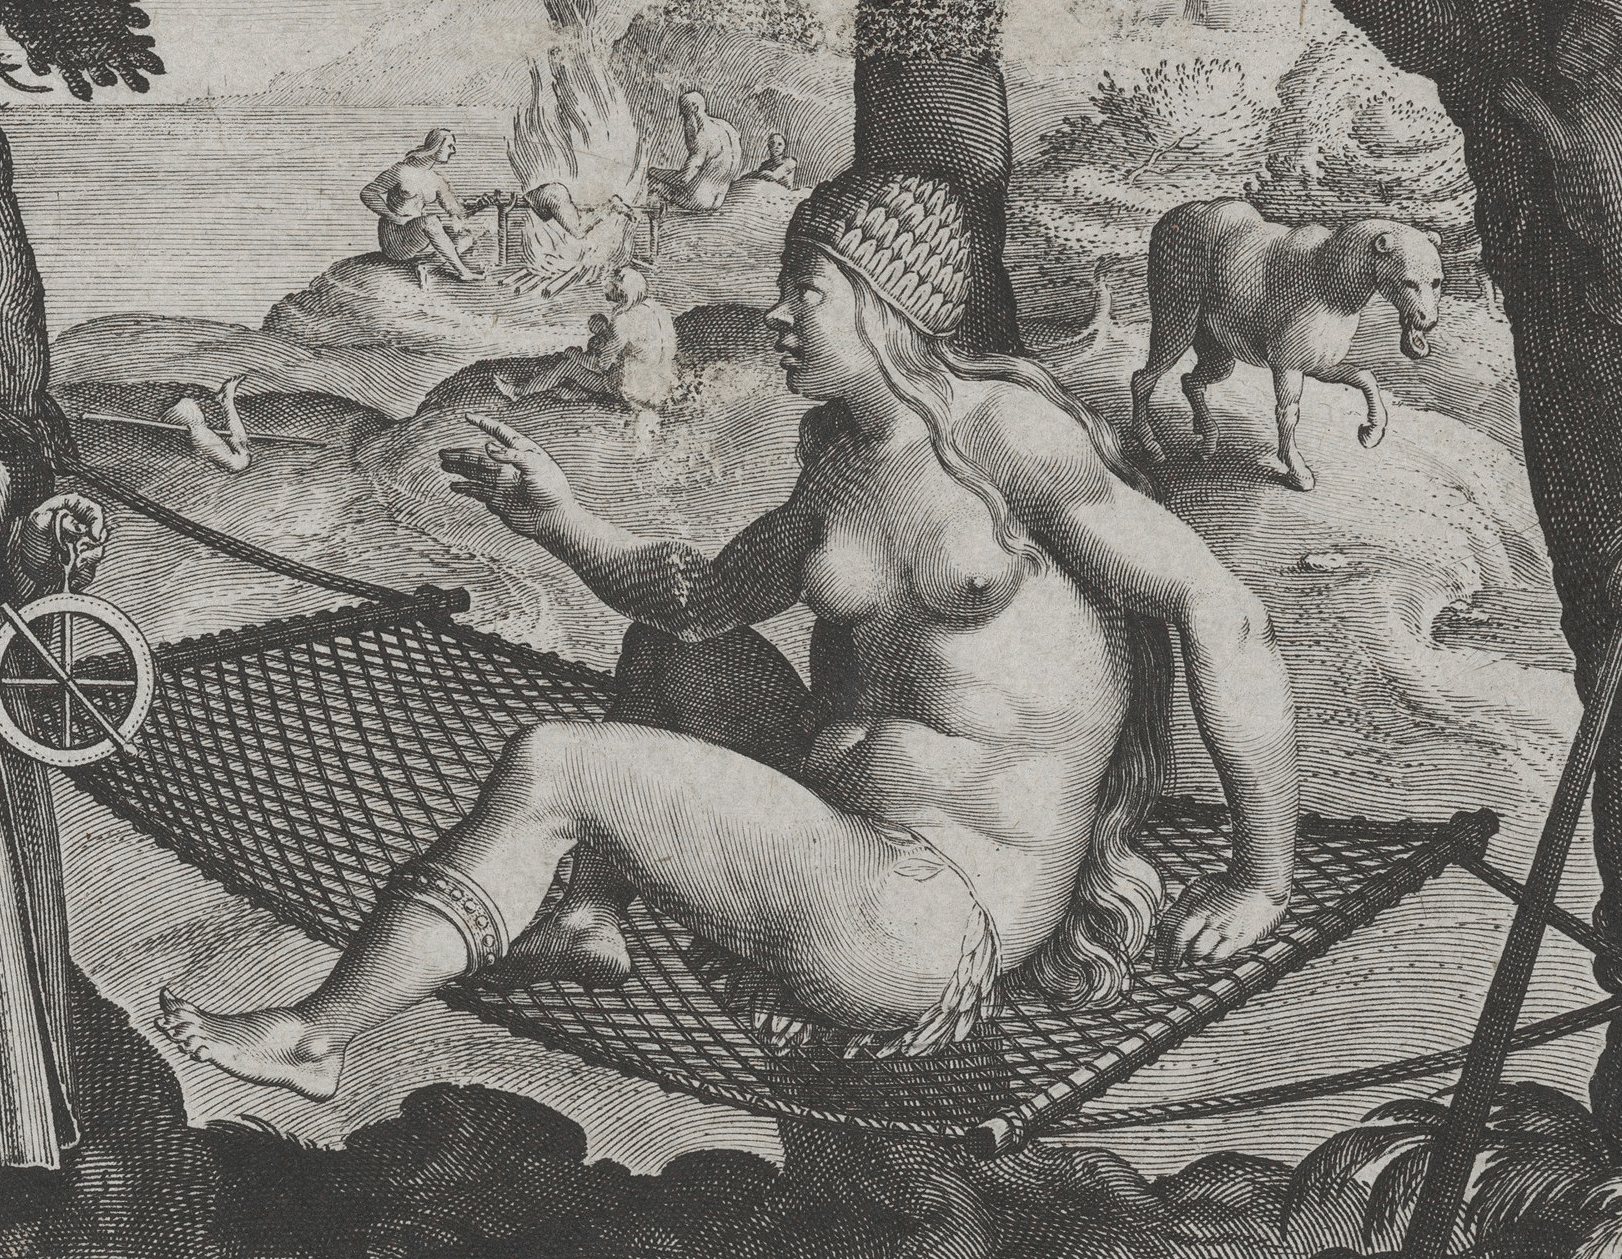 Theodoor Galle (after Johannes Stradanus) "The Discovery of America," detail of America, from Nova Reperta, c. 1600, engraving, published by Philips Galle, 27 x 20 cm (The Metropolitan Museum of Art)